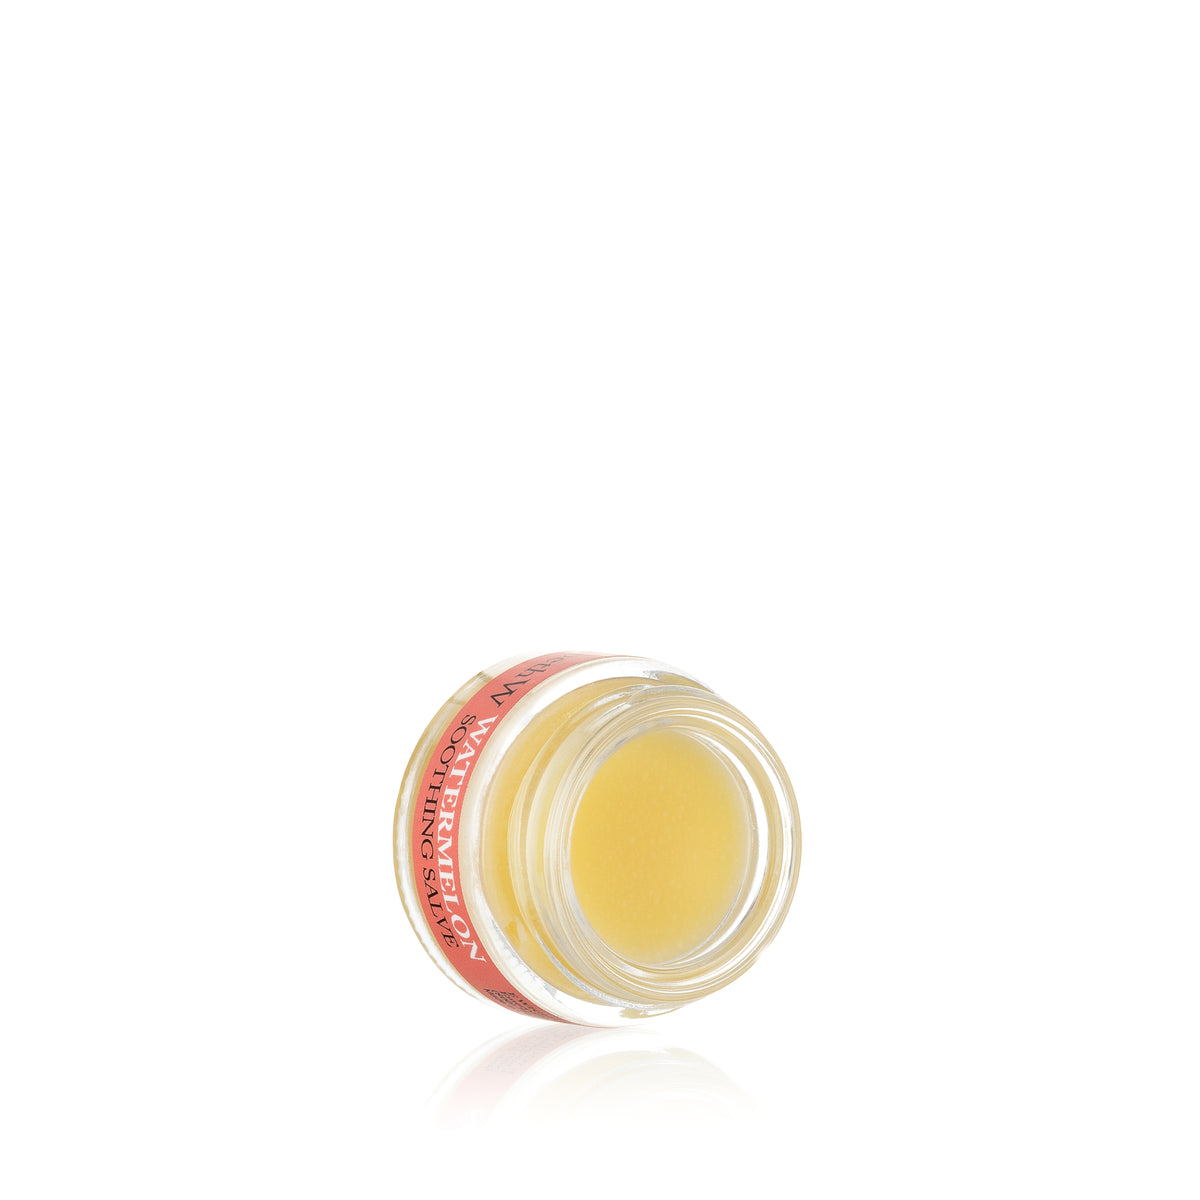 Watermelon Soothing Salve